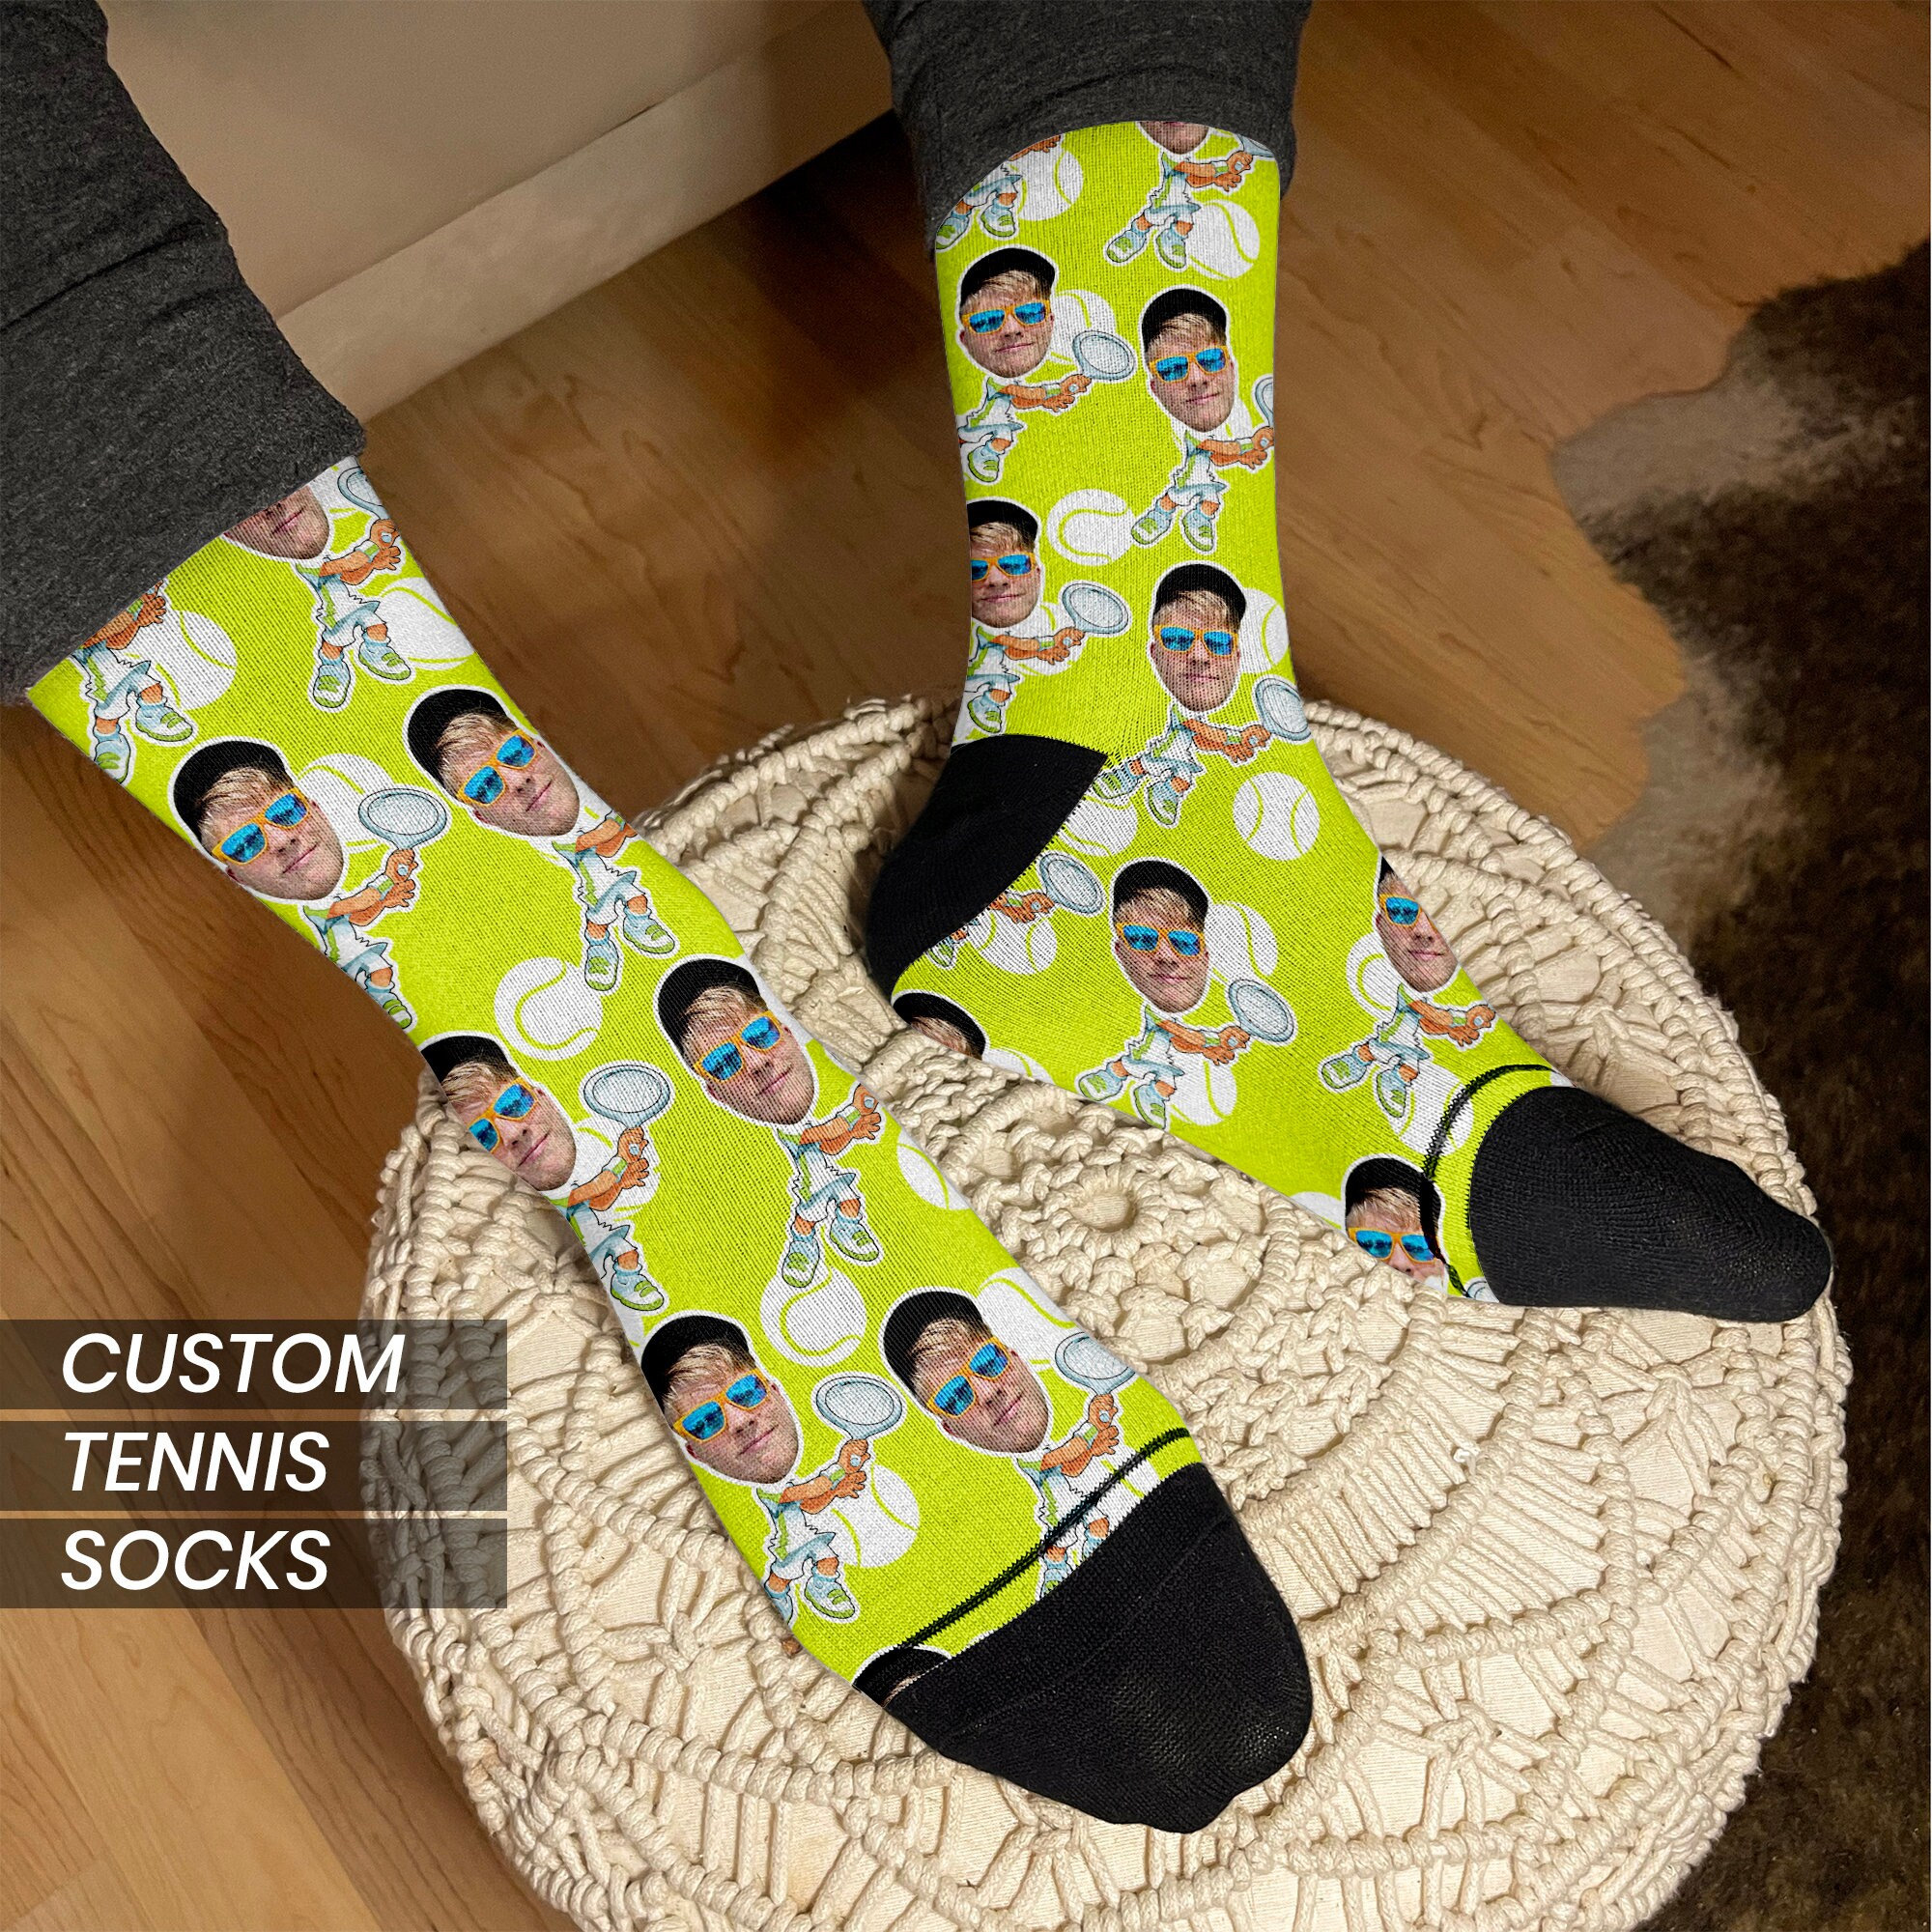 Buy Tennis Coach Gift Online In India - Etsy India